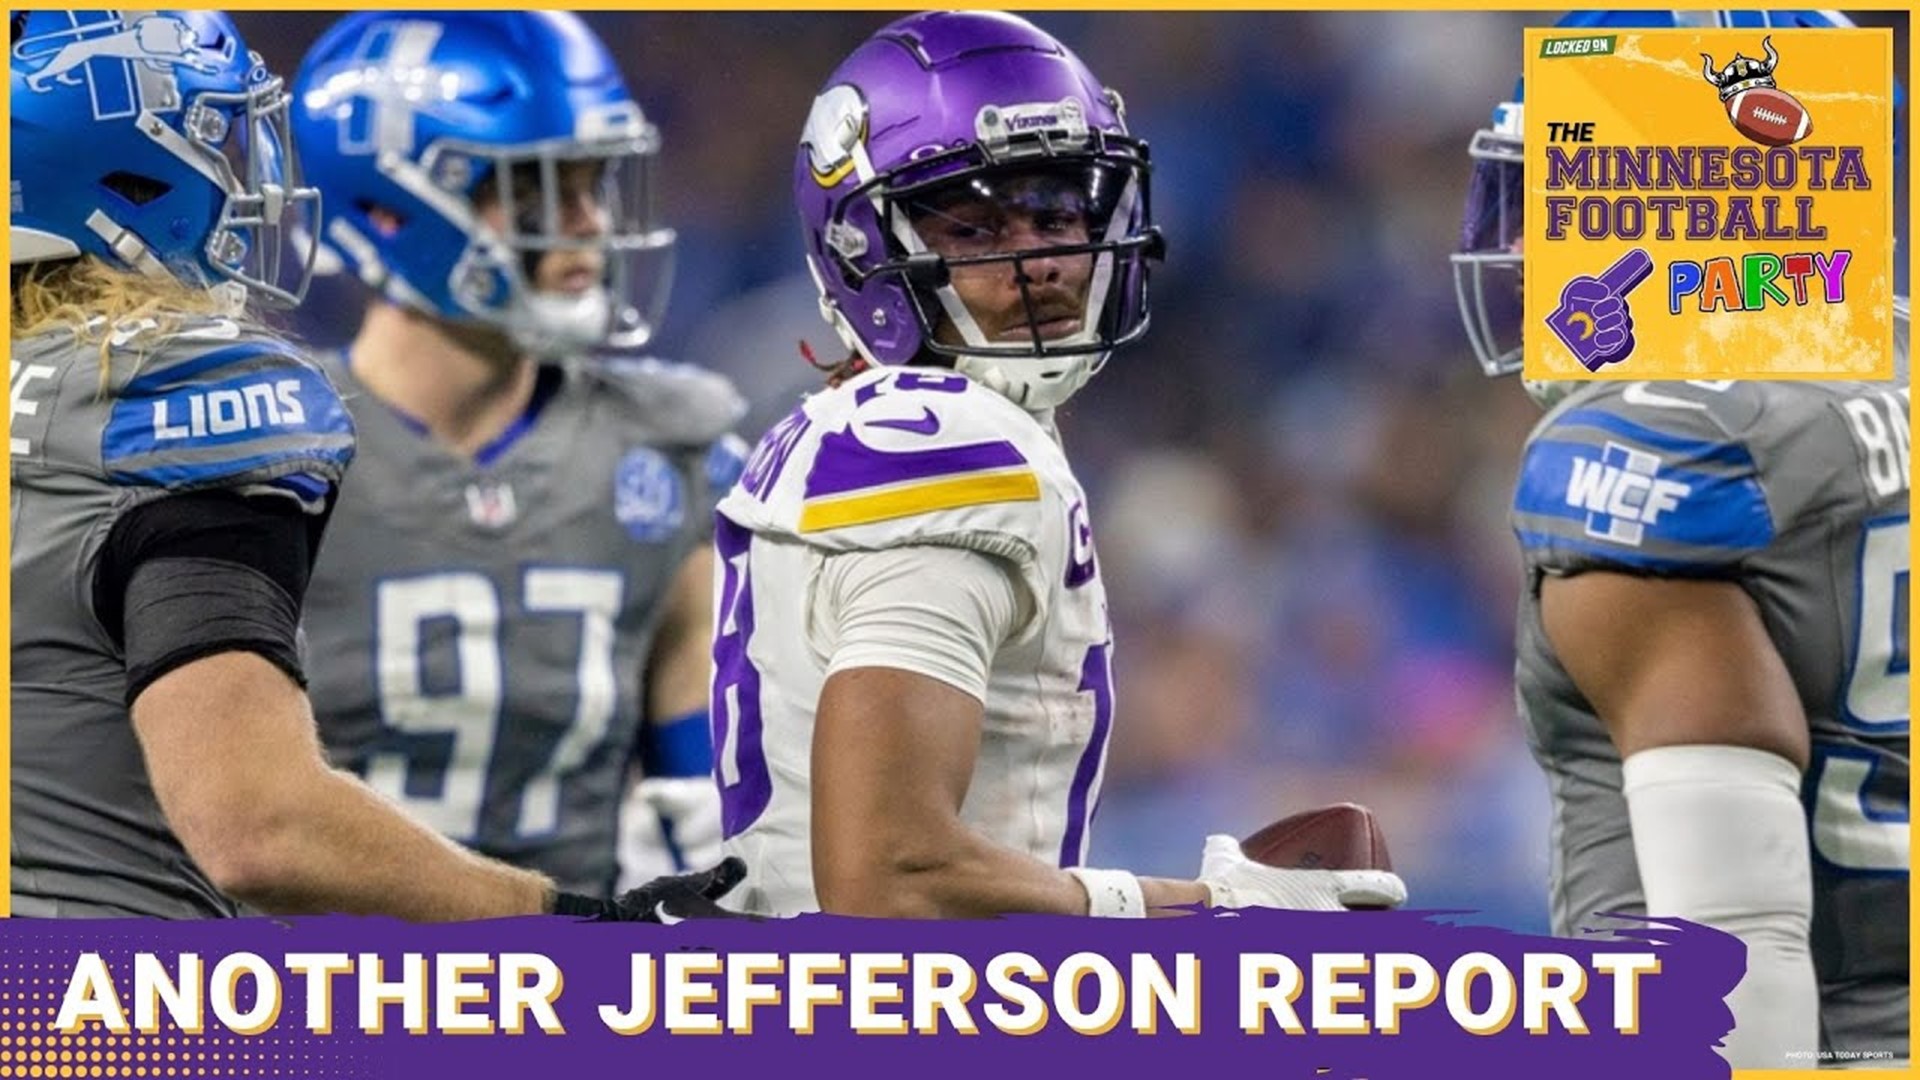 The Latest Justin Jefferson Report Sounds Kind of Fishy - The Minnesota Football Party